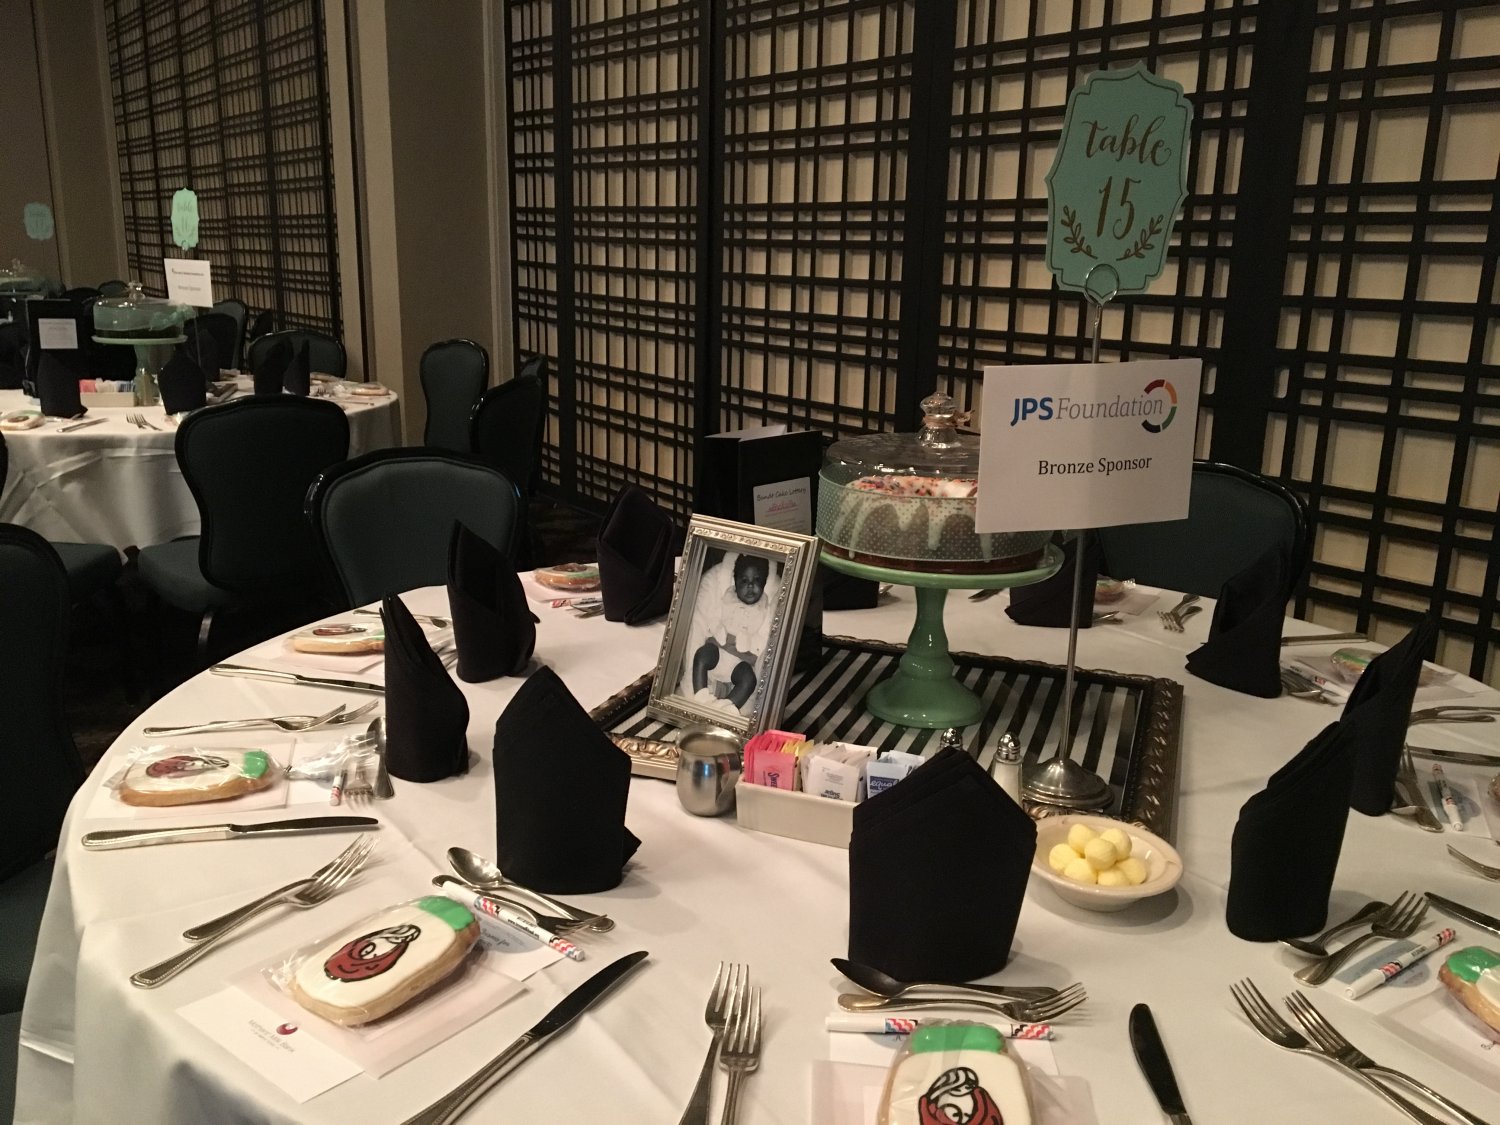 Table setting for 10 at country club event